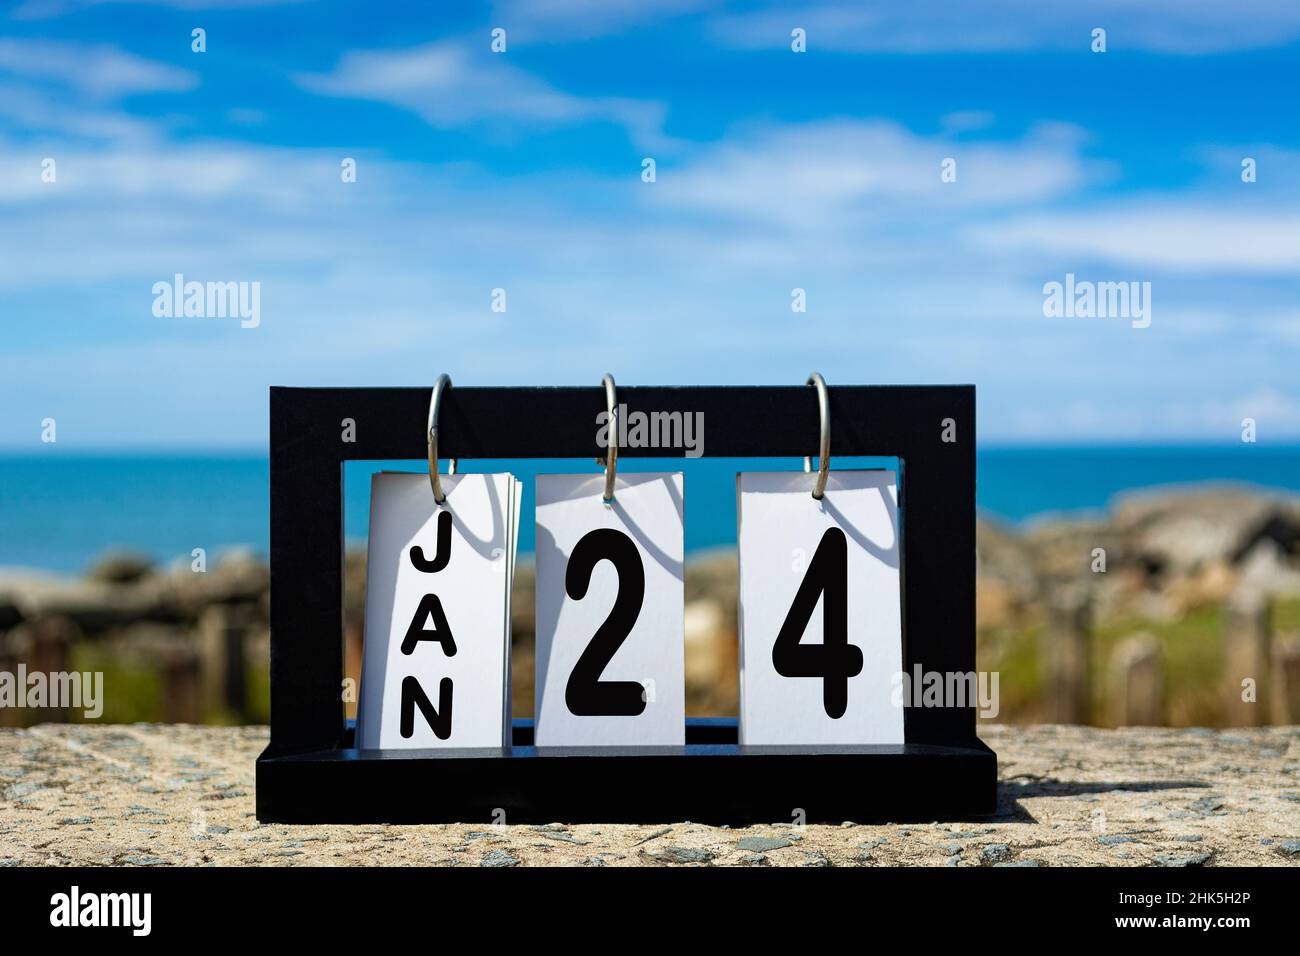 Jan 24 calendar date text on wooden frame with blurred background of ocean. Calendar concept Stock Photo